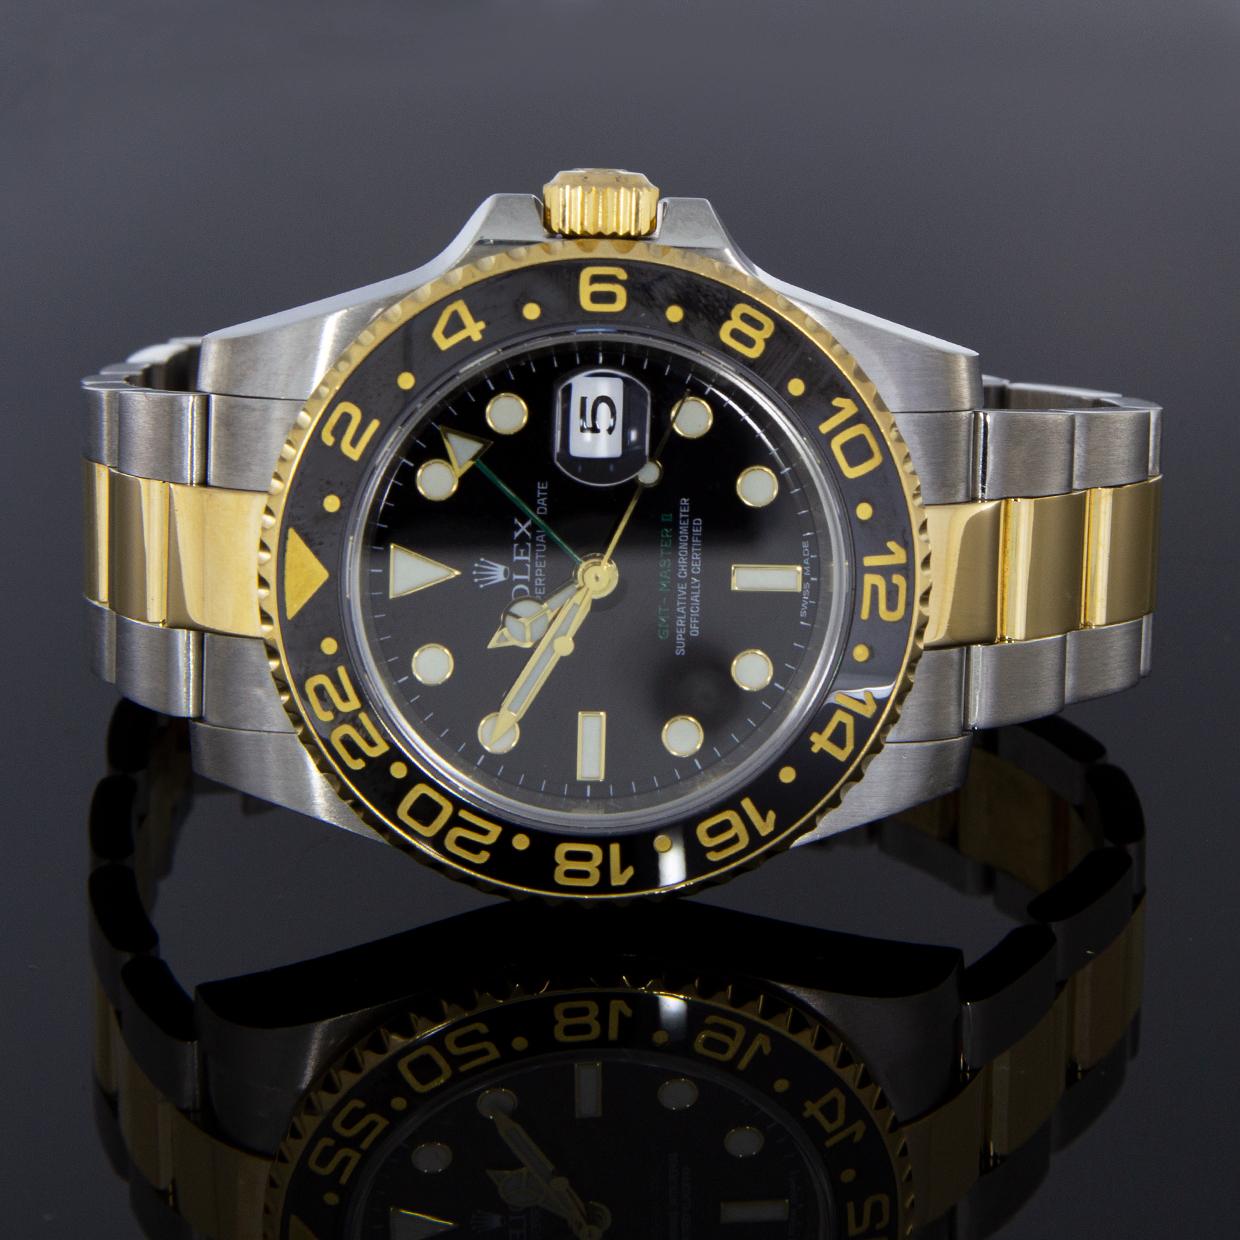 Rolex Two-Tone GMT-Master II Watch with Black Dial, Model 116713 In Excellent Condition For Sale In Columbia, MO